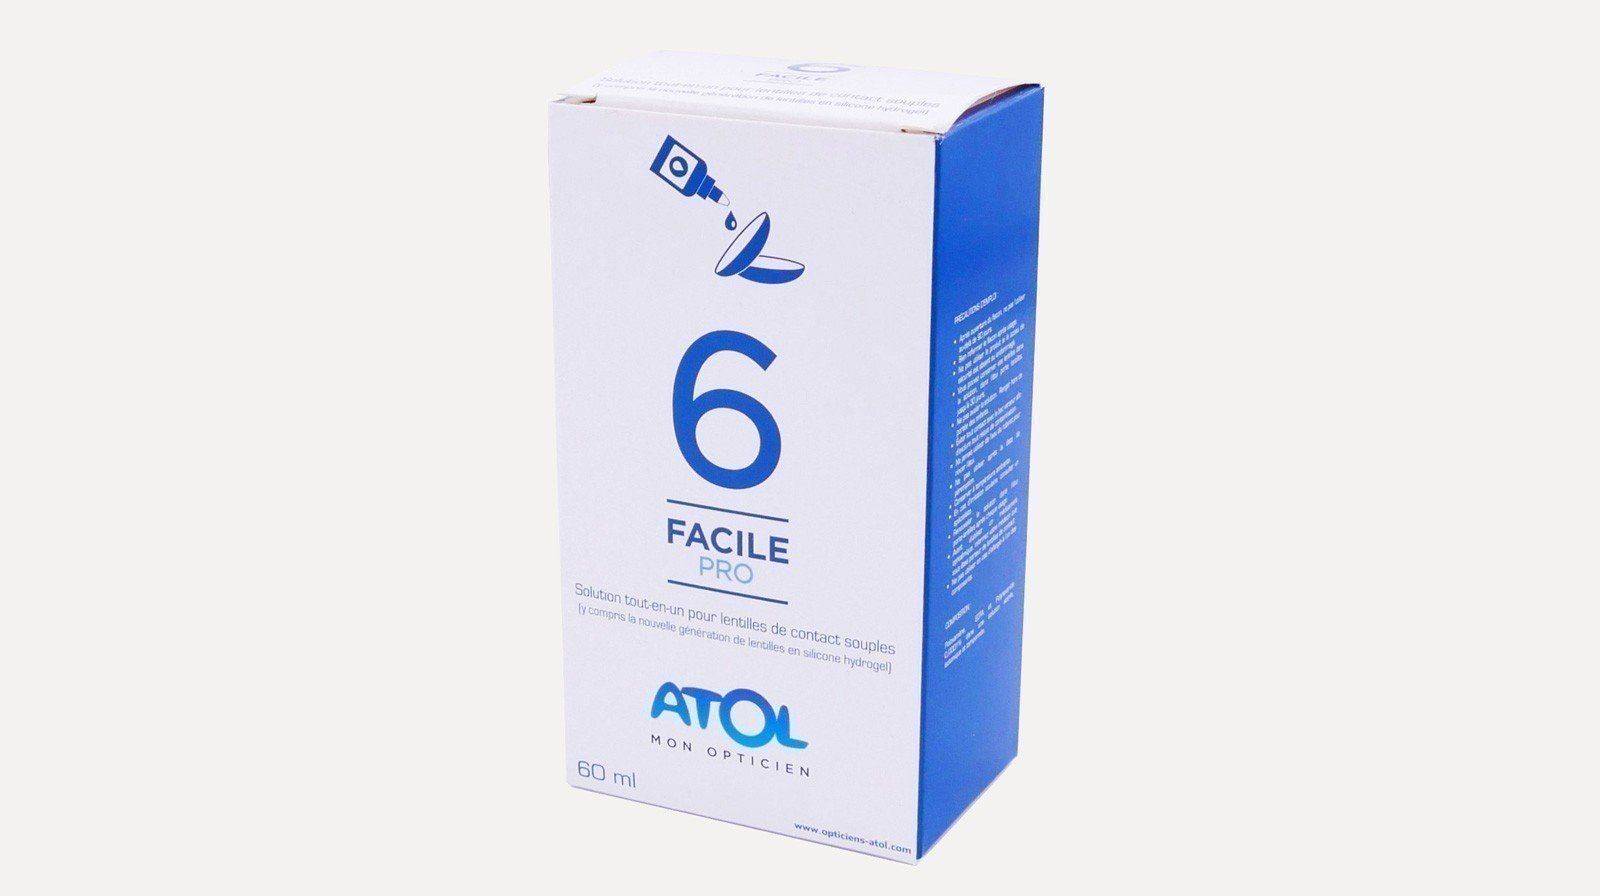 Solution multifonctions - 6 FACILE 60 ml - Atol